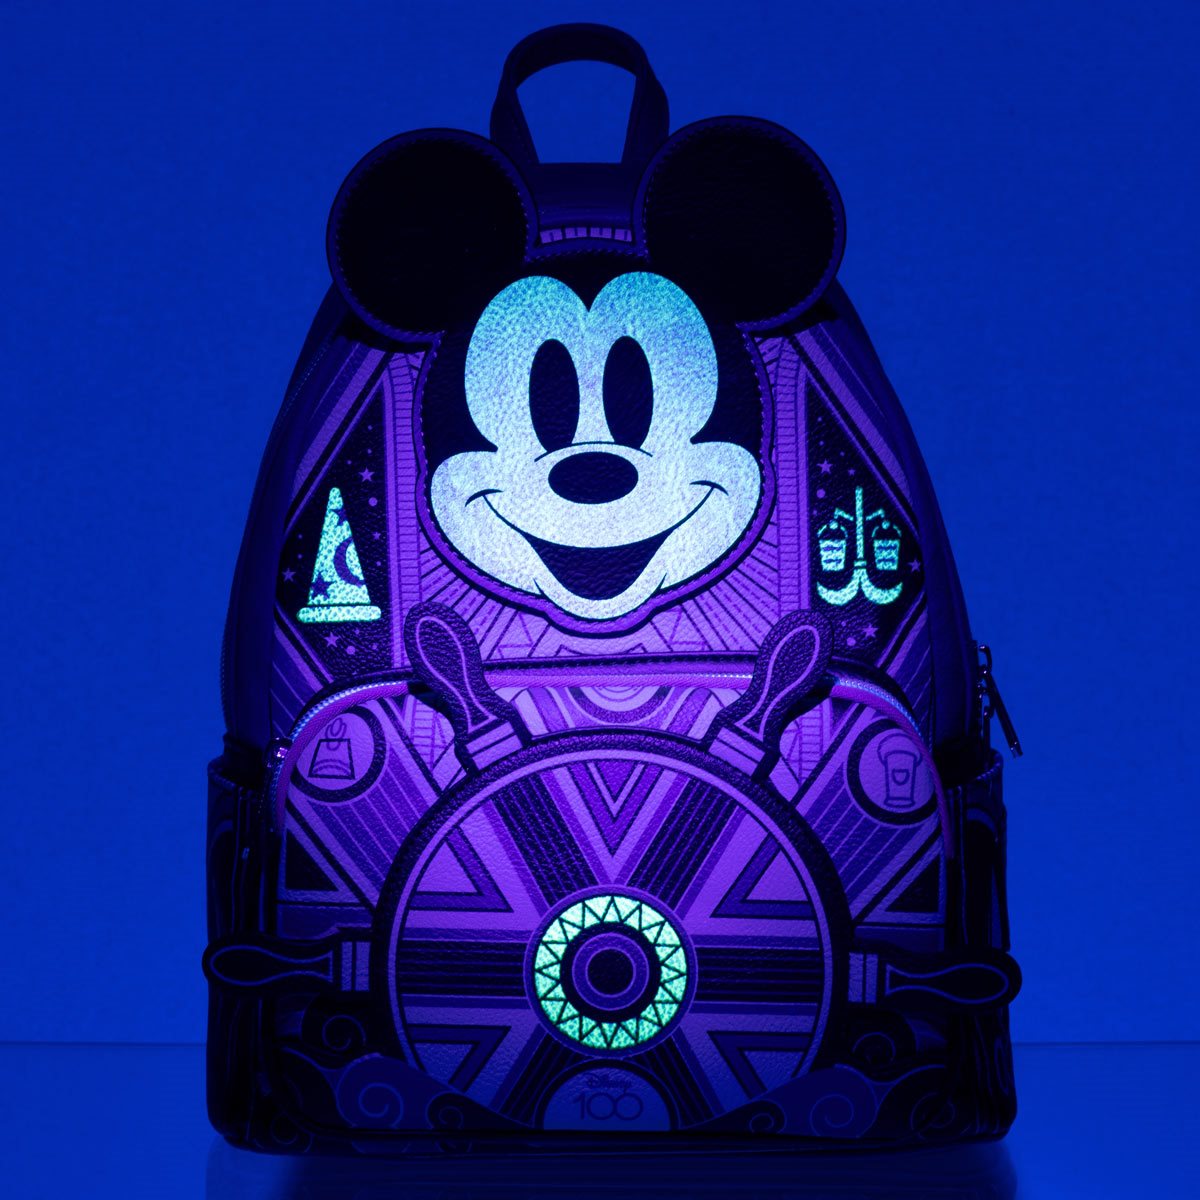 Disney Backpack Bag - Mickey Mouse Sketches - Gray & Black